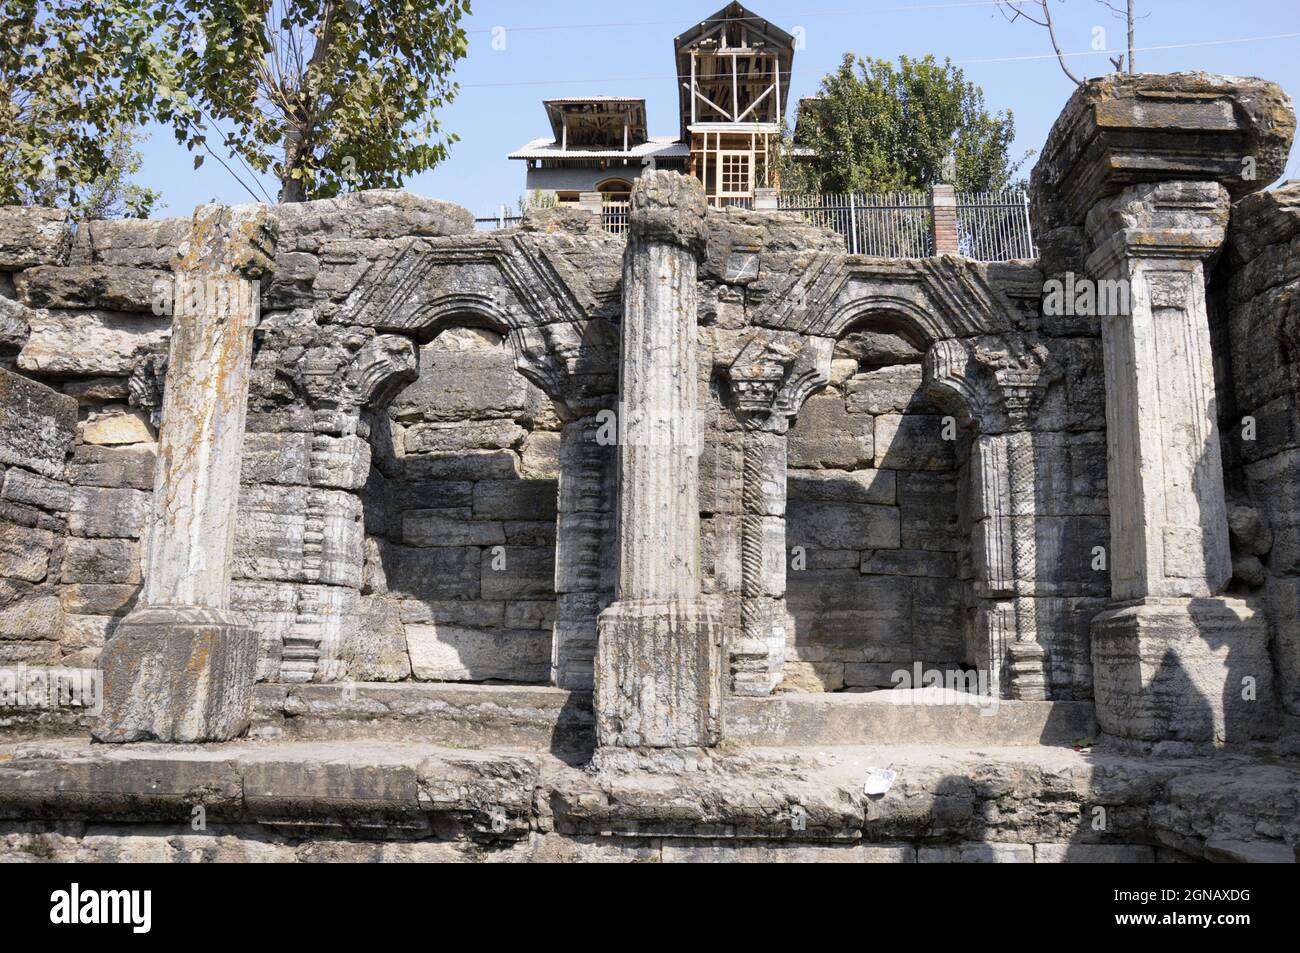 Avantipur Temple, founded by king Avantivarman (AD 855-883). Over the years, the temple has been reduced to ruins but it is still a popular site on wa Stock Photo